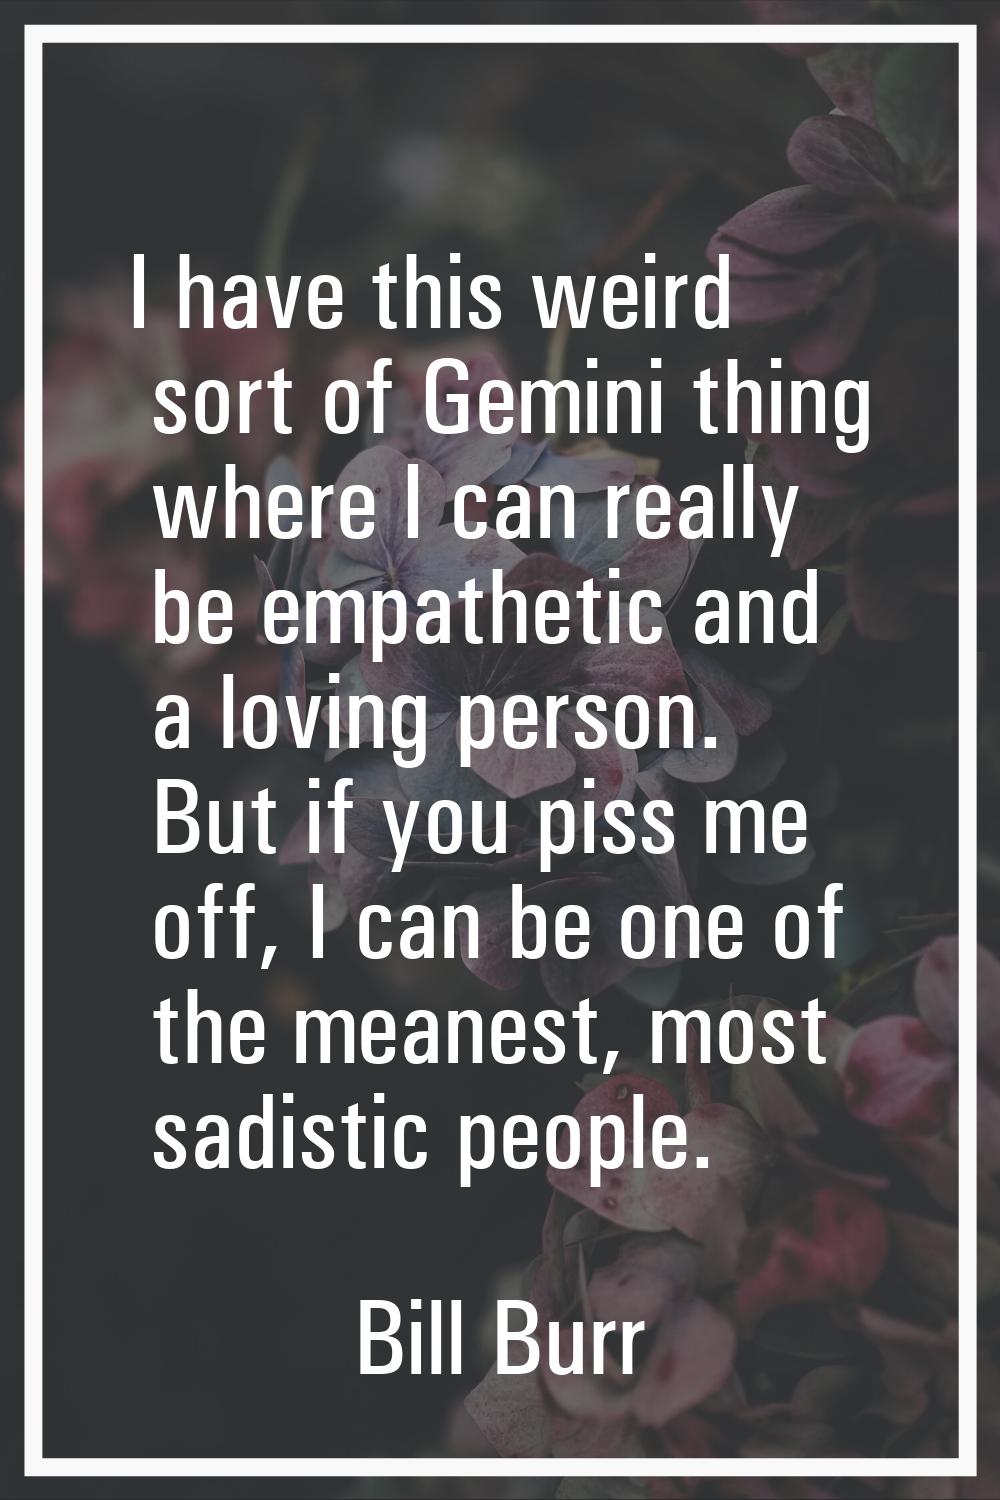 I have this weird sort of Gemini thing where I can really be empathetic and a loving person. But if